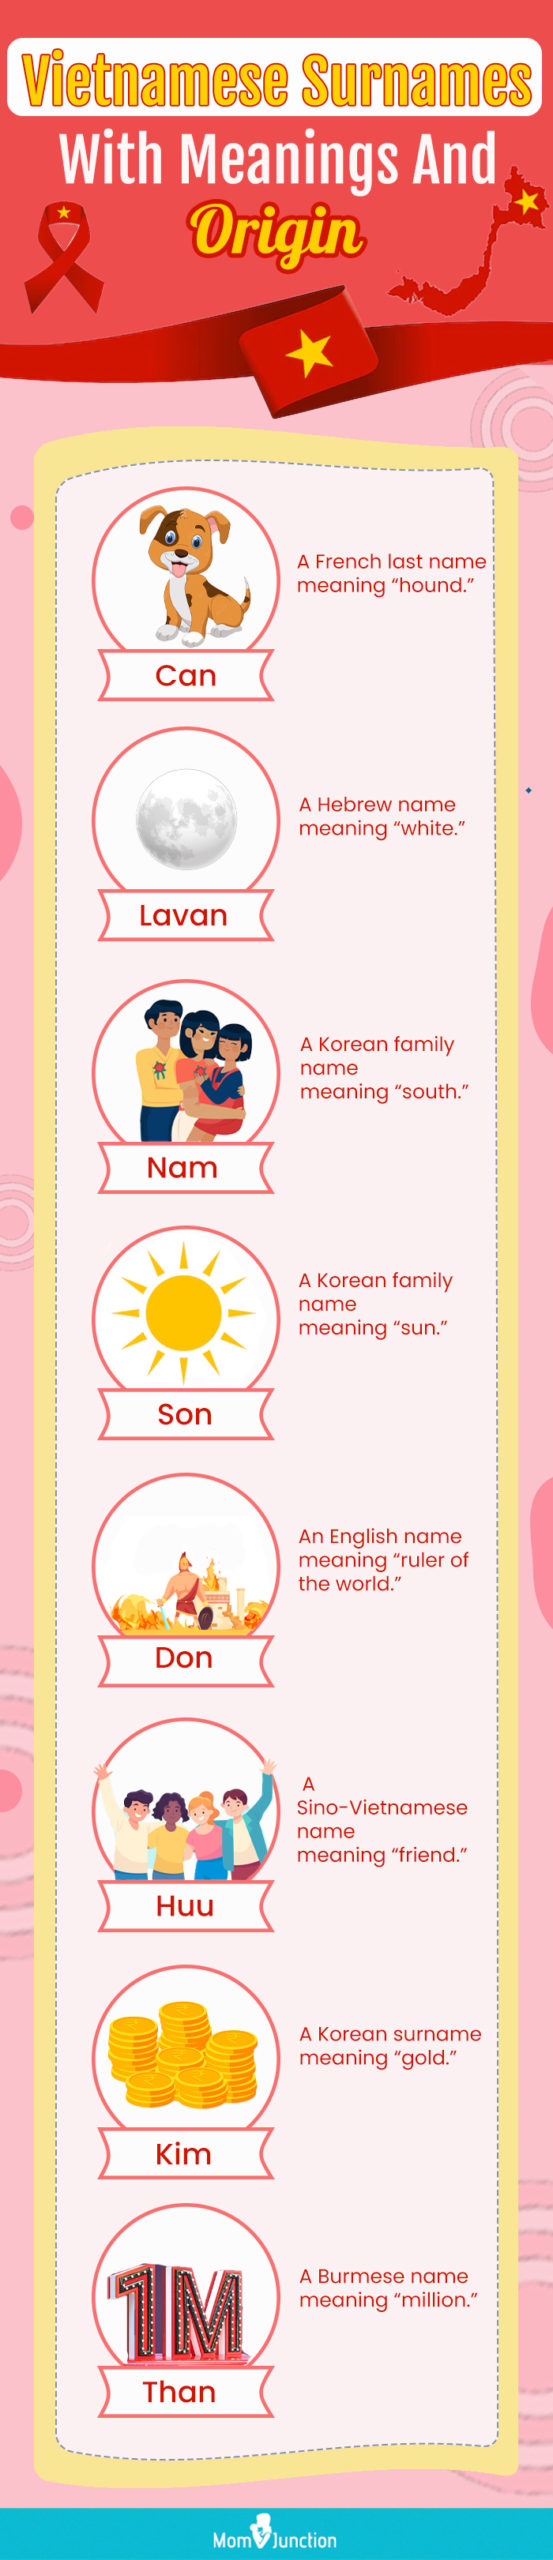 vietnamese surnames with meanings and origin (infographic)